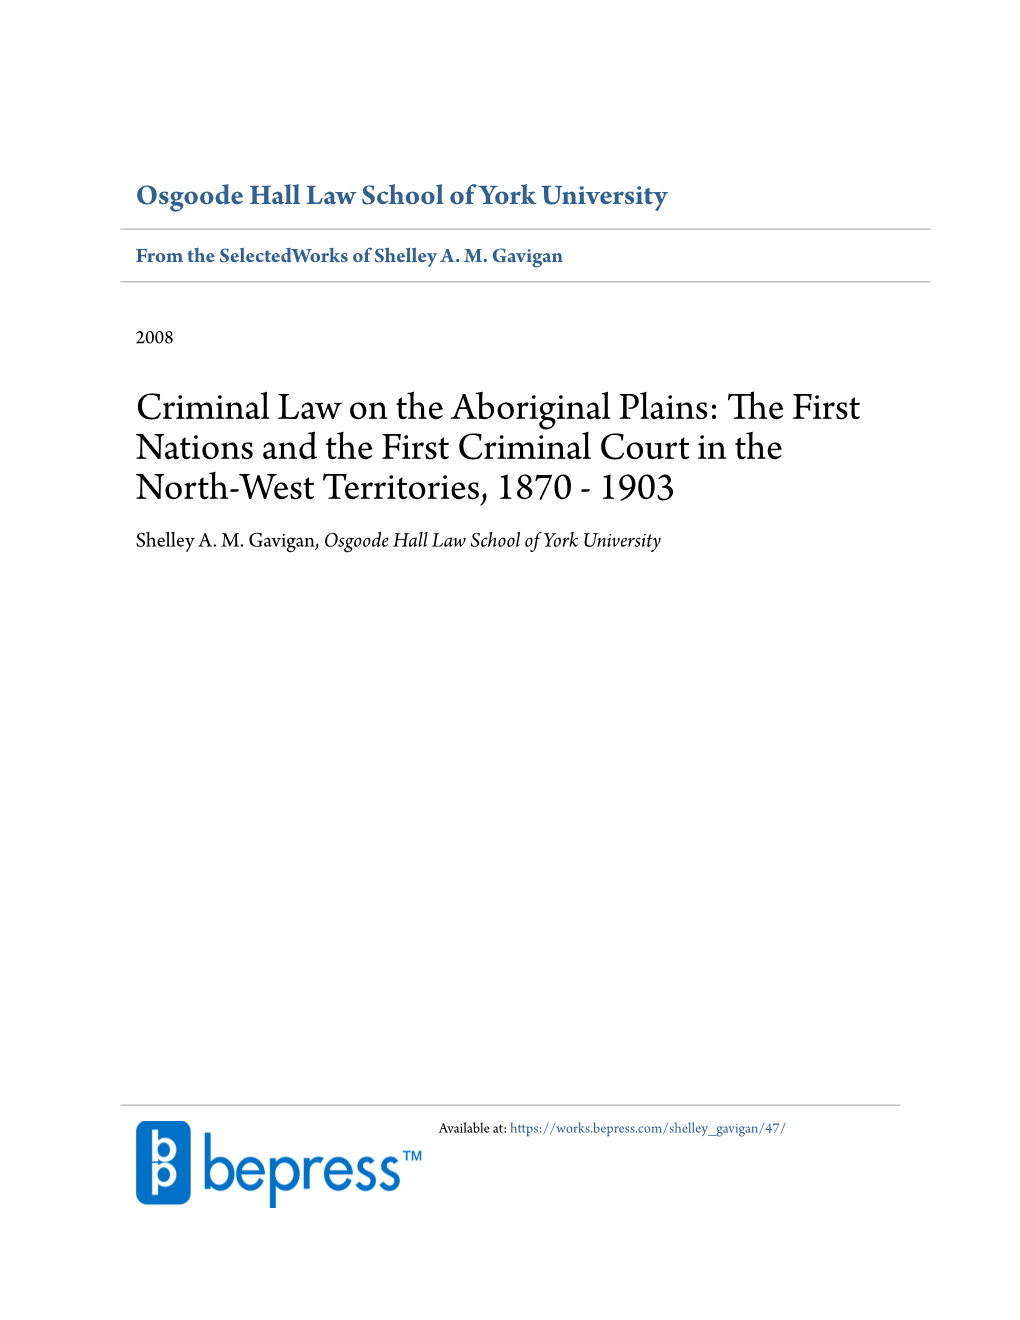 Criminal Law on the Aboriginal Plains: the Irf St Nations and the First Criminal Court in the North-West Territories, 1870 - 1903 Shelley A